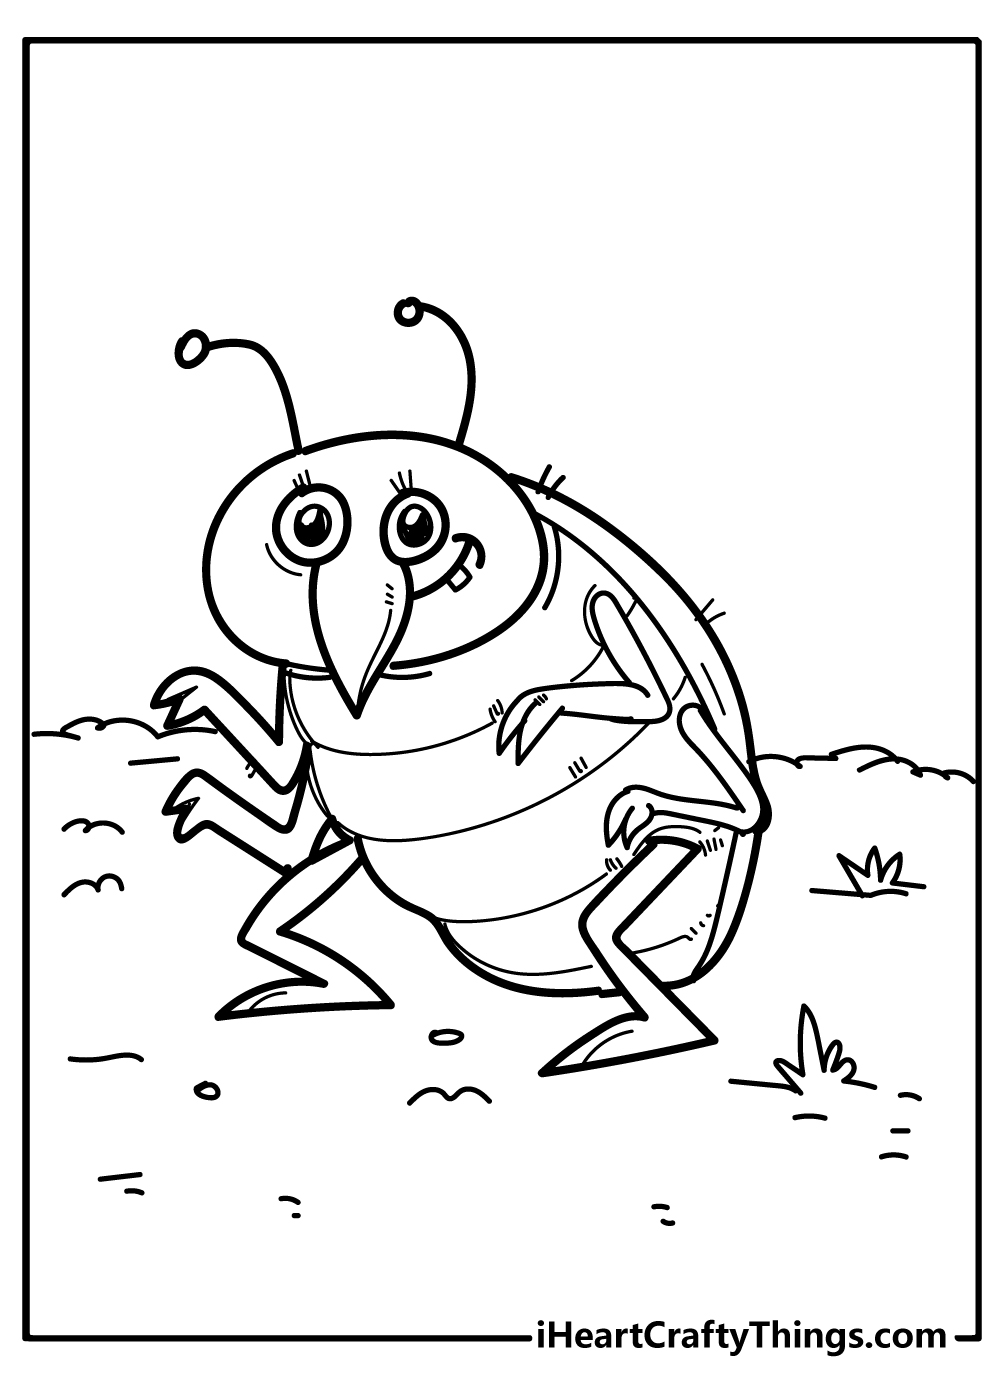 Bug Coloring Pages for kids free download